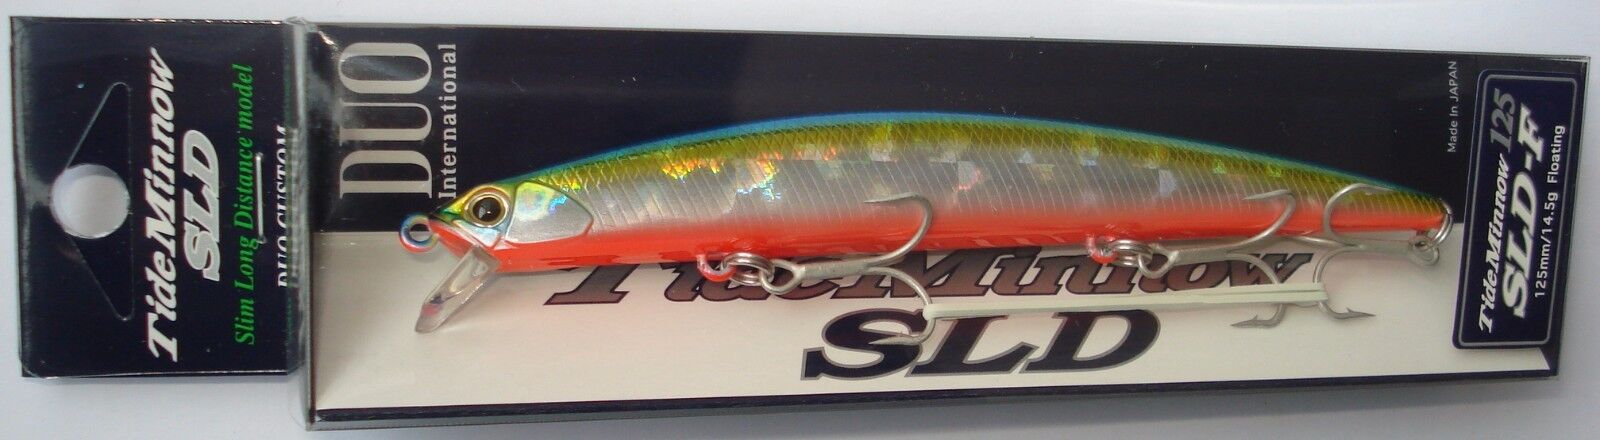 DUO Tide Minnow 125 Sld-f Floating Lure D-256 - 8861 for sale online | eBay